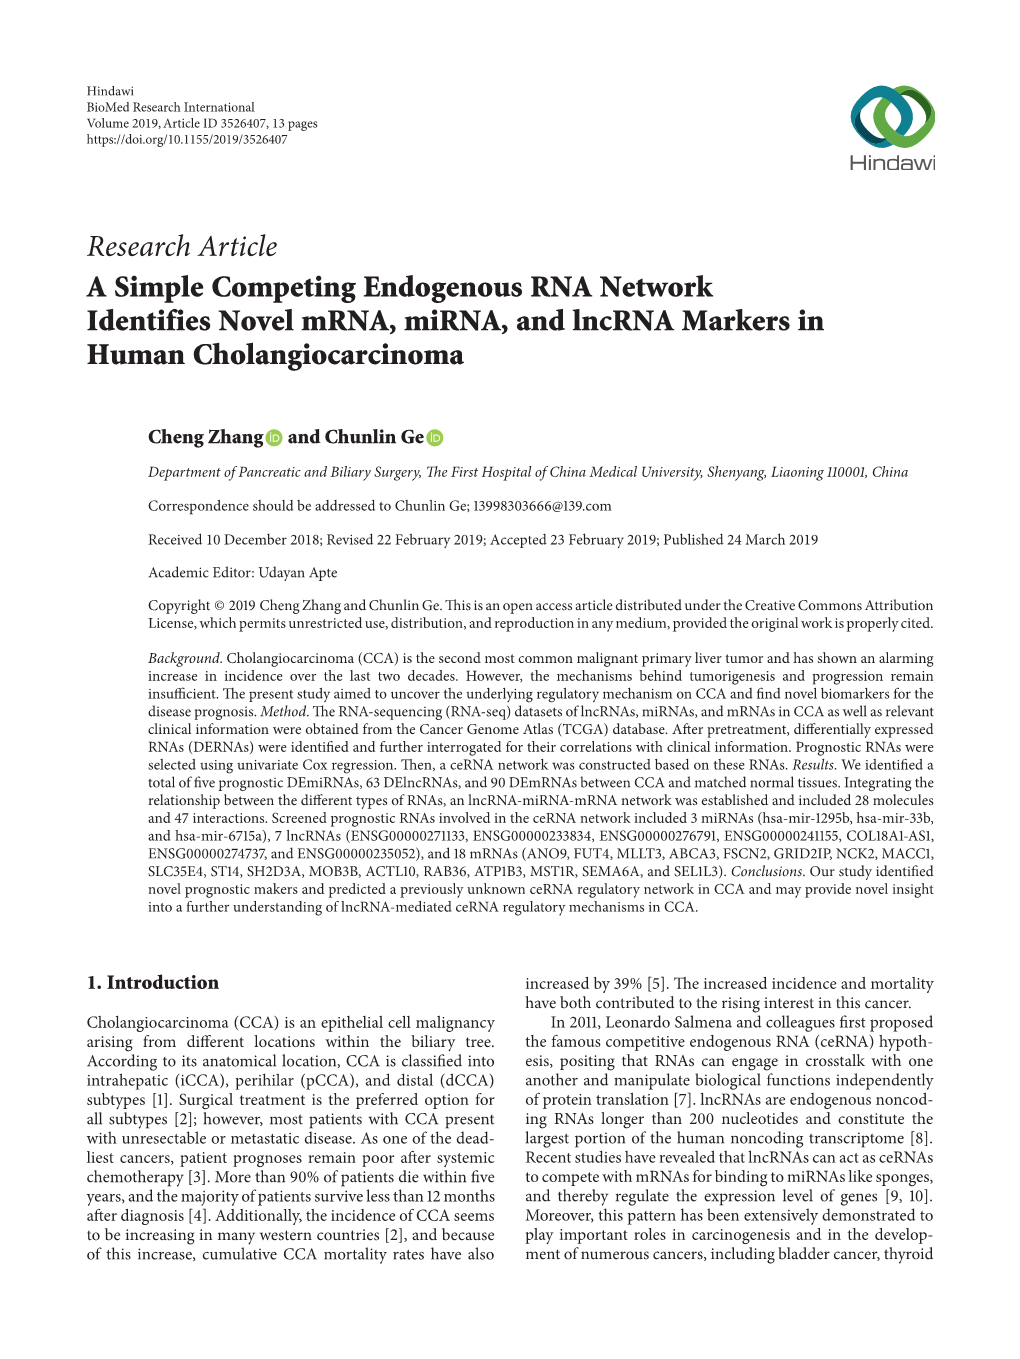 A Simple Competing Endogenous RNA Network Identifies Novel Mrna, Mirna, and Lncrna Markers in Human Cholangiocarcinoma